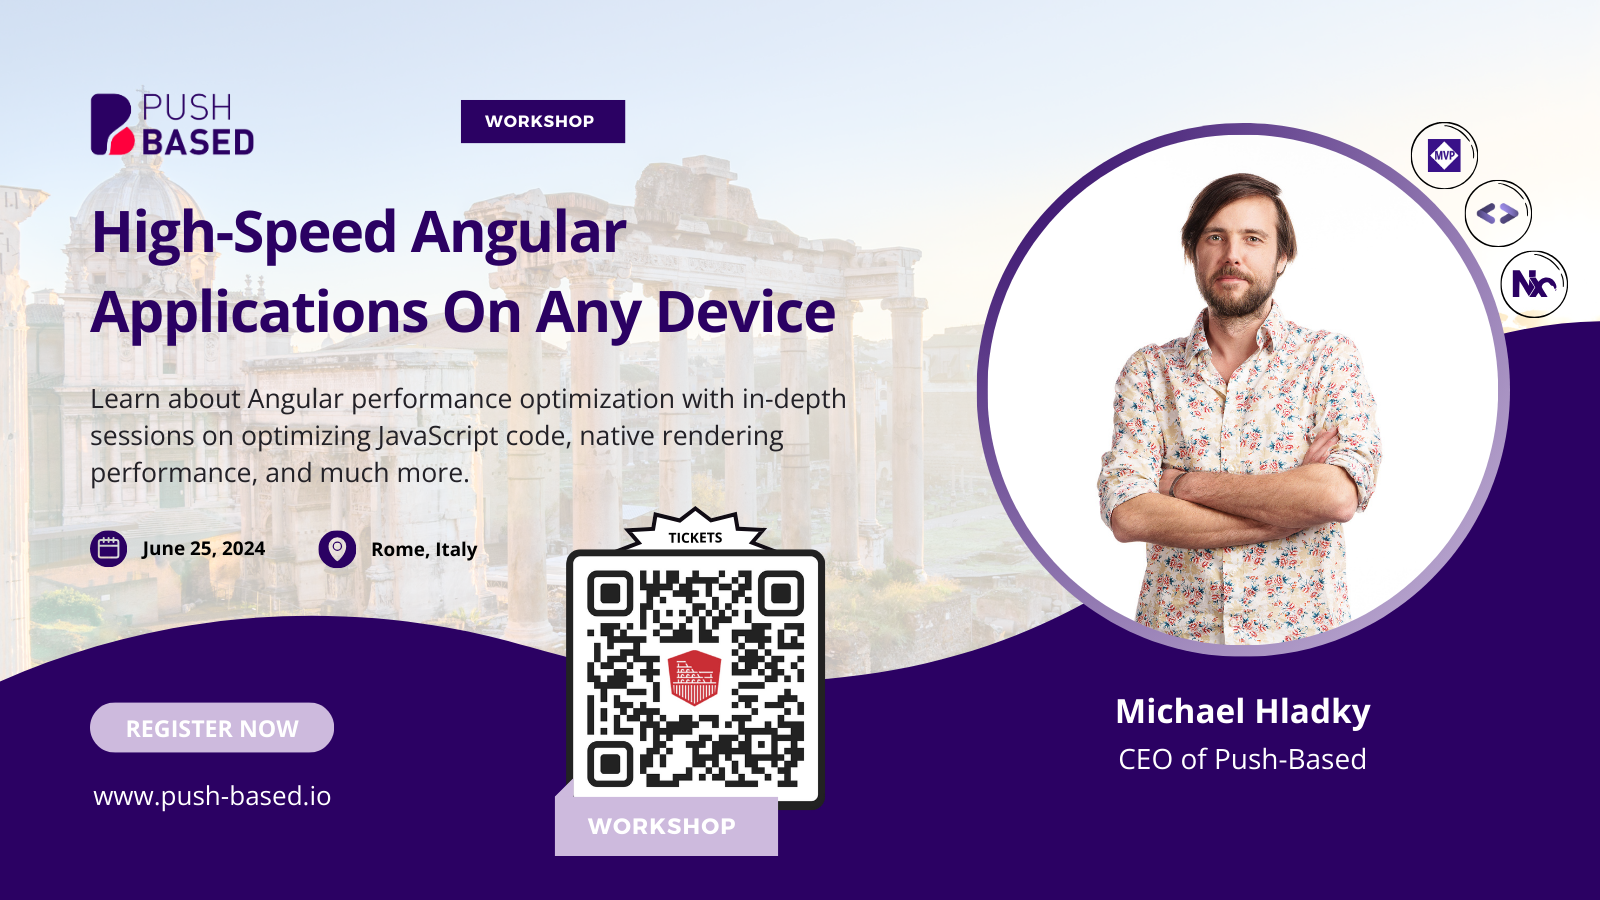 High-Speed Angular Applications On Any Device. Poster.